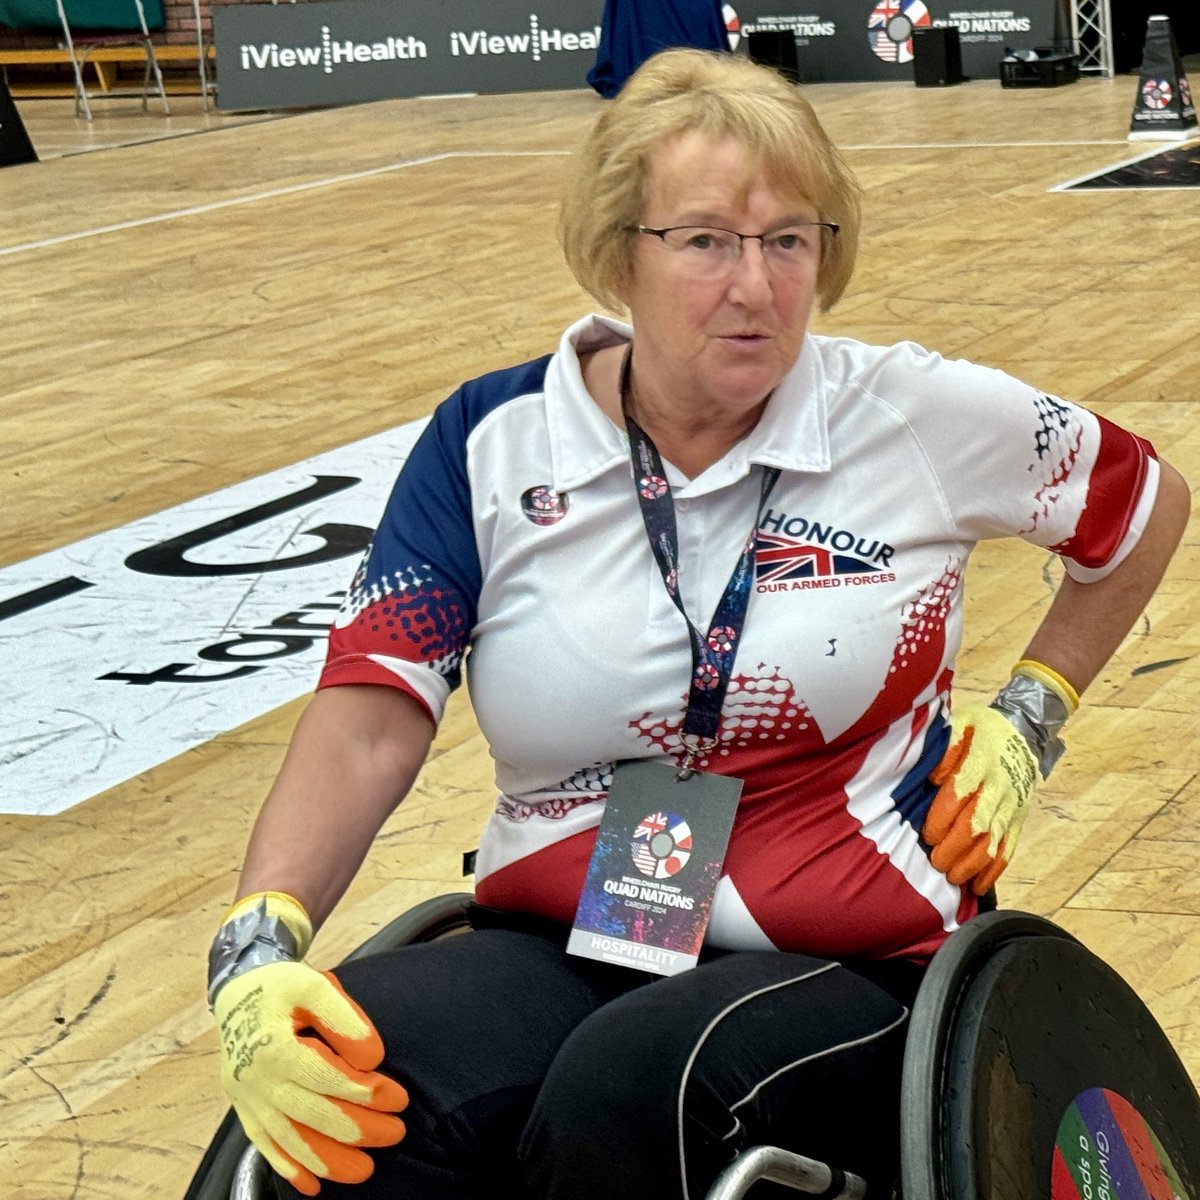 #TheseGirlsCan 😀 Female Participation in wheelchair rugby. Local Cardiff women from the corporate world tried out wheelchair rugby at the Quad Nations. Some of our current female players joined in and helped them. An amazing afternoon. 

#QuadNations #QN24 #cardiff…